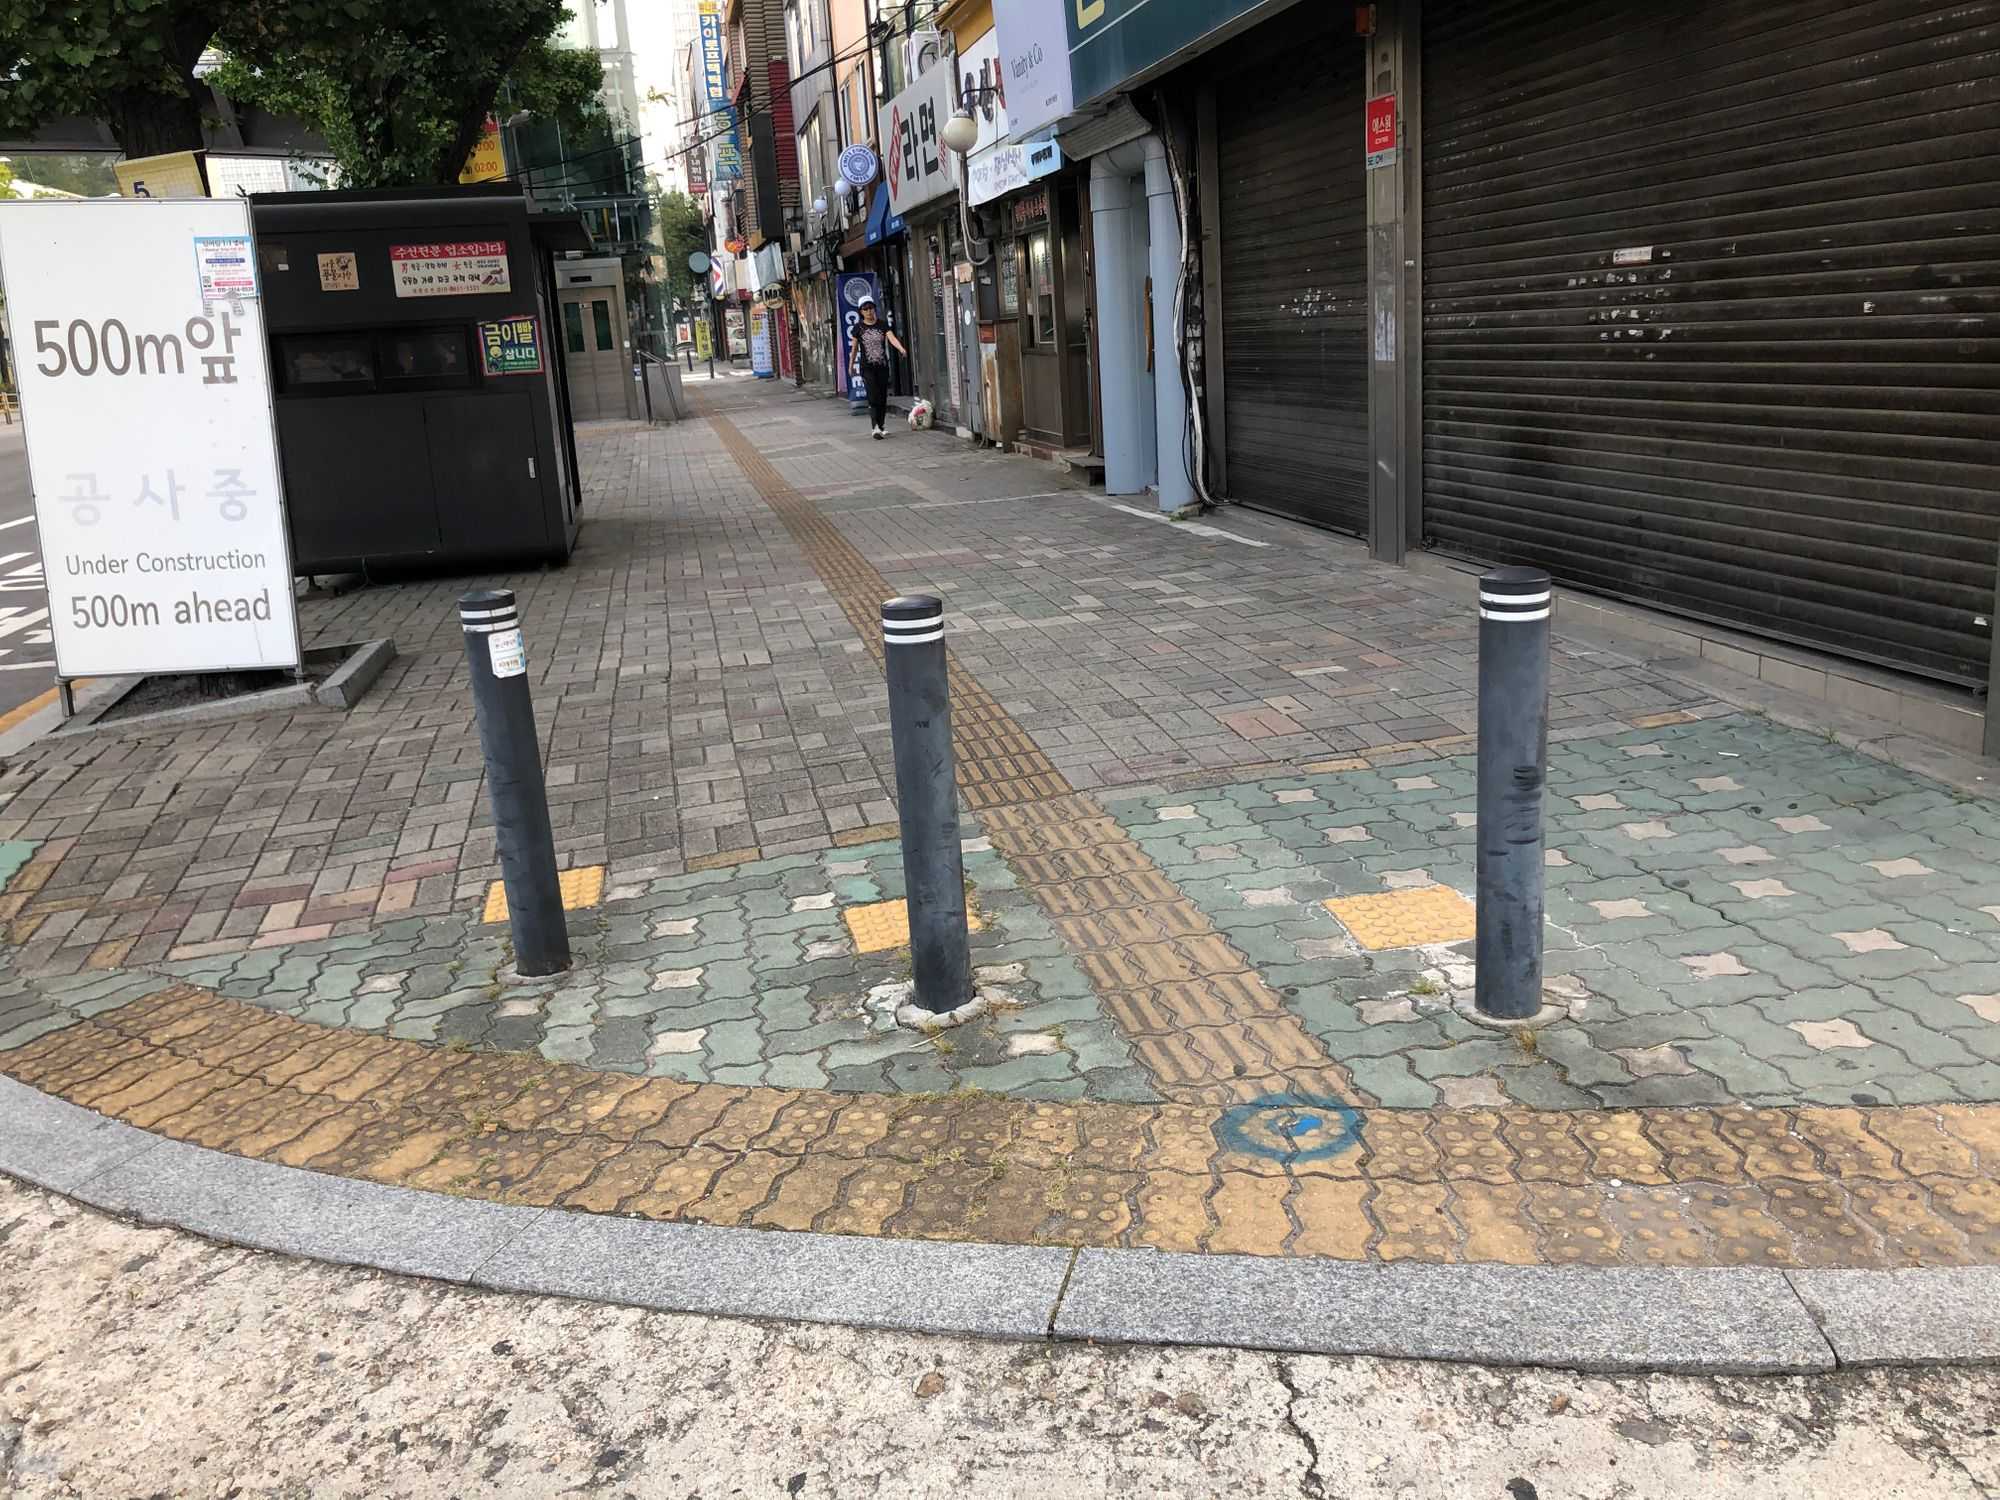 Tactile paving for the visually impaired (Image by author)